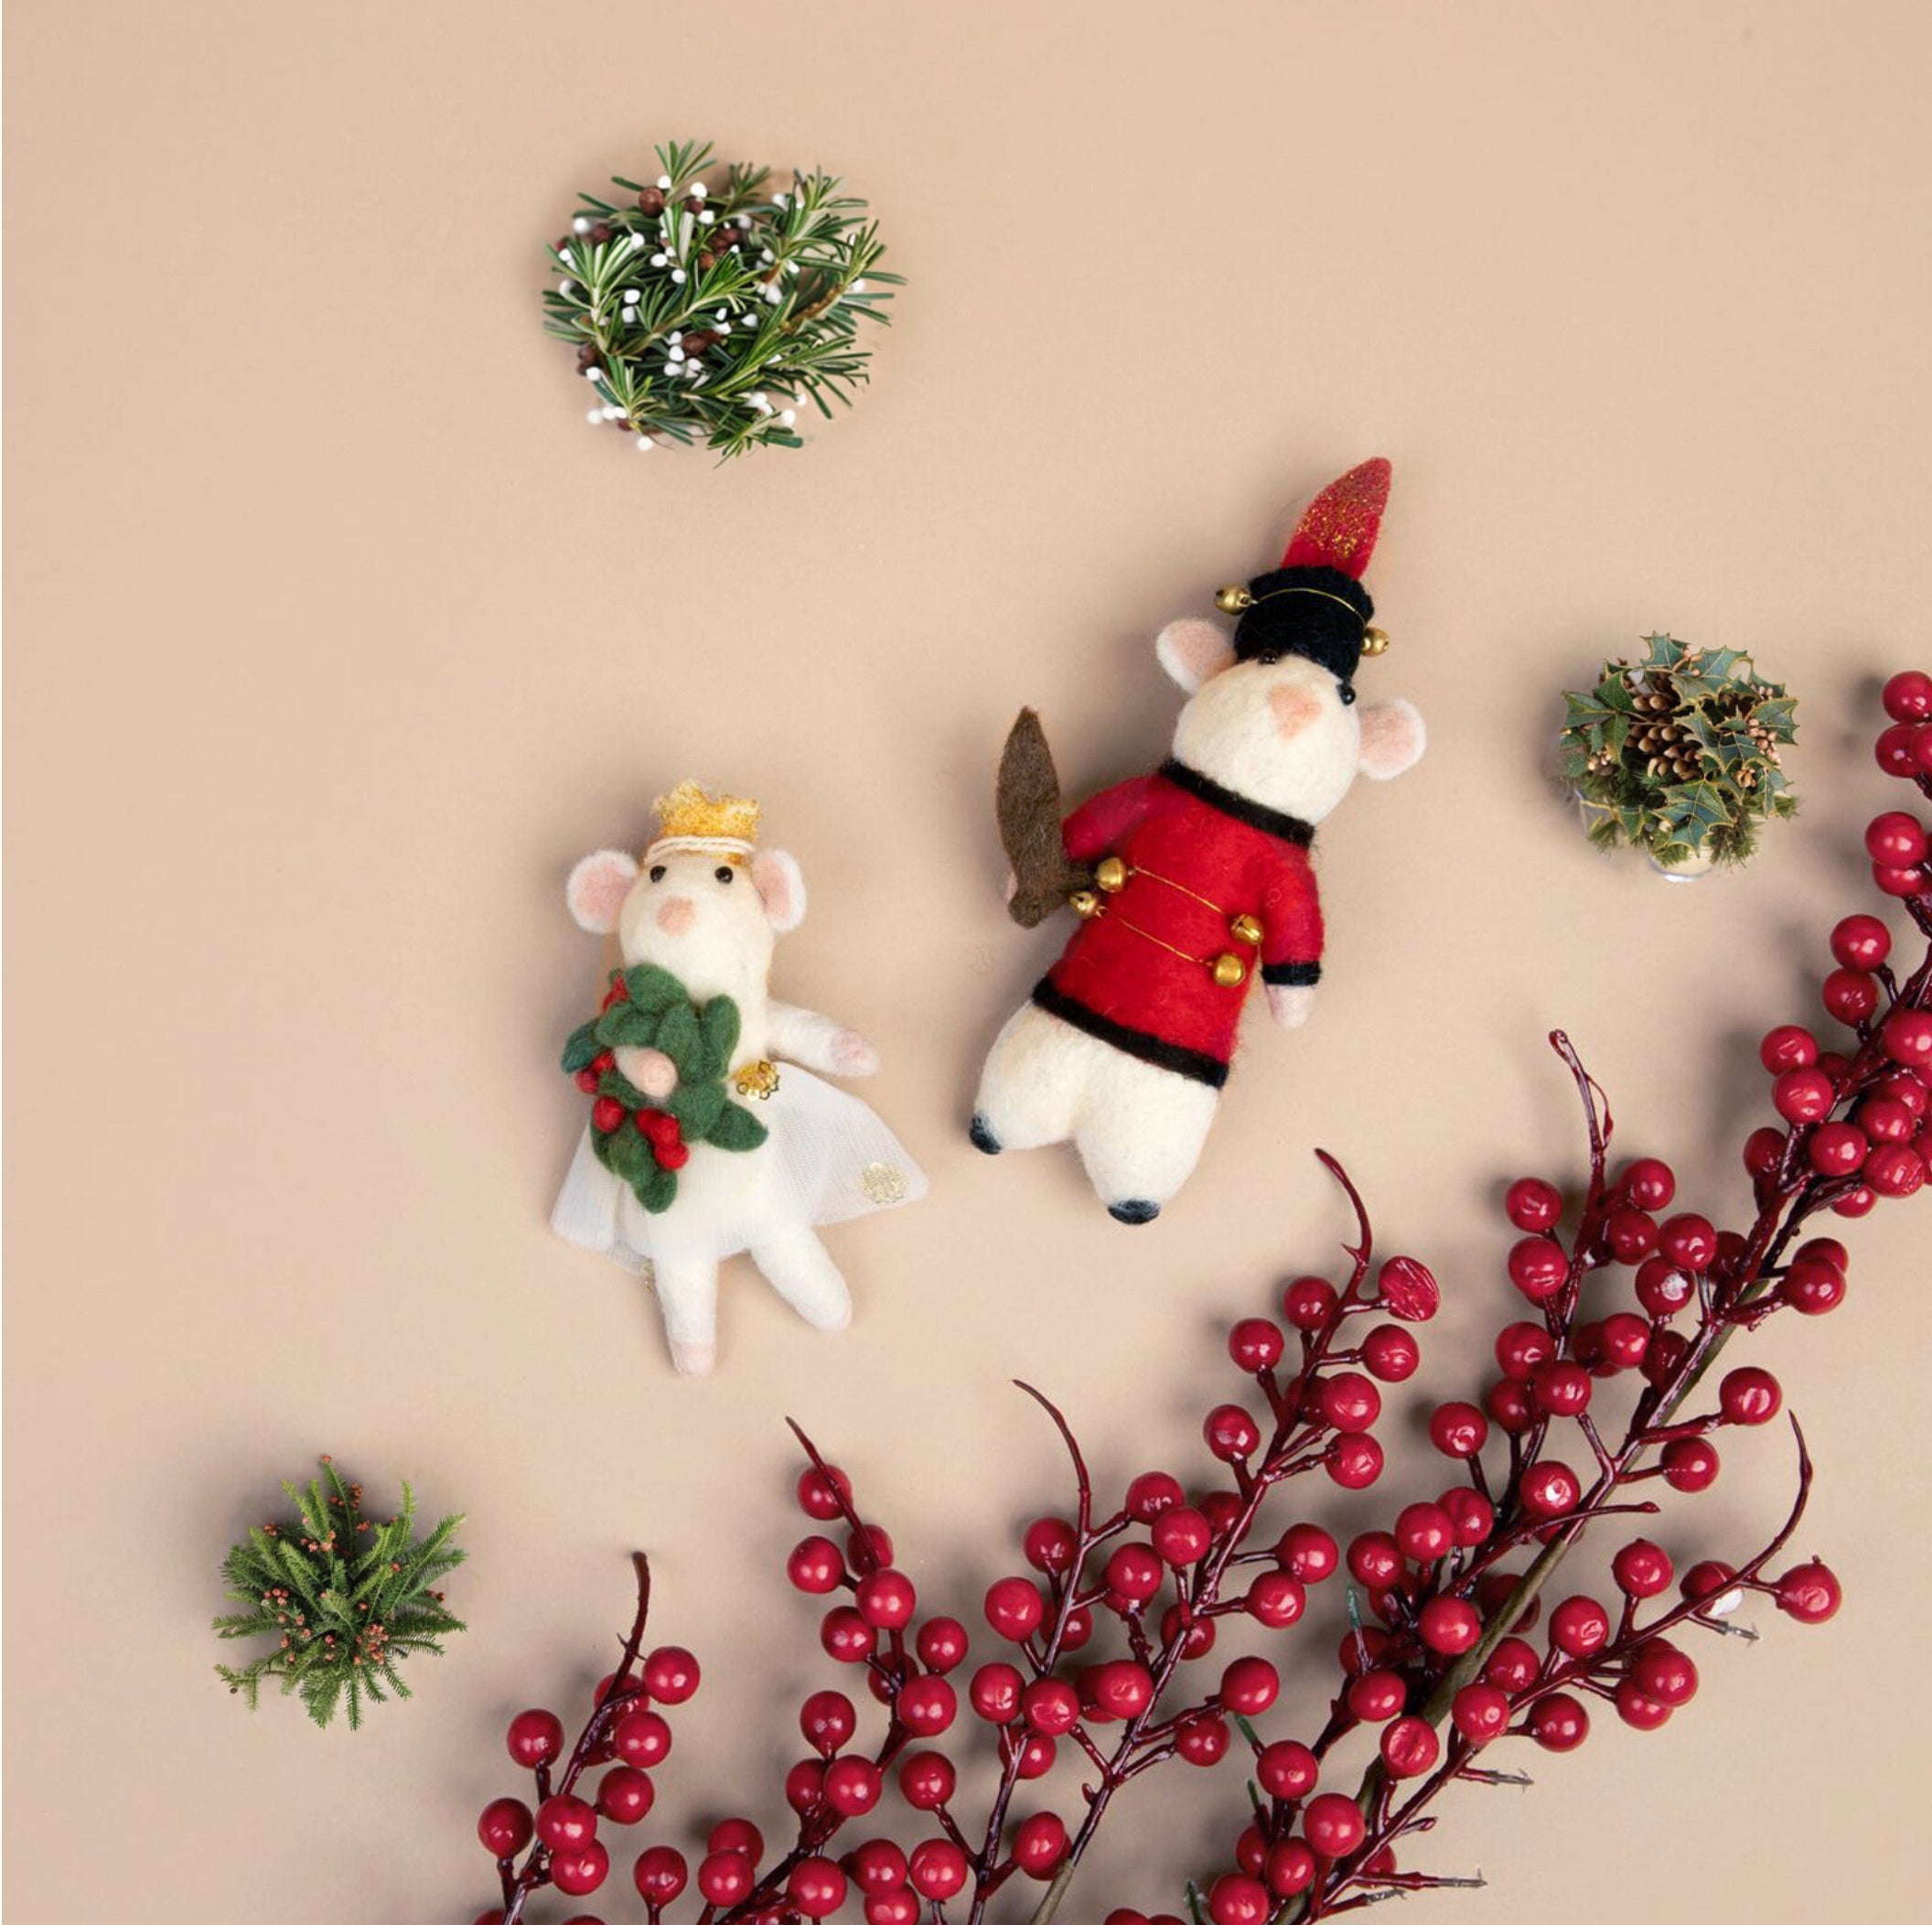 Felt Ballerina Mouse and Soldier Mouse ornaments on a beige background